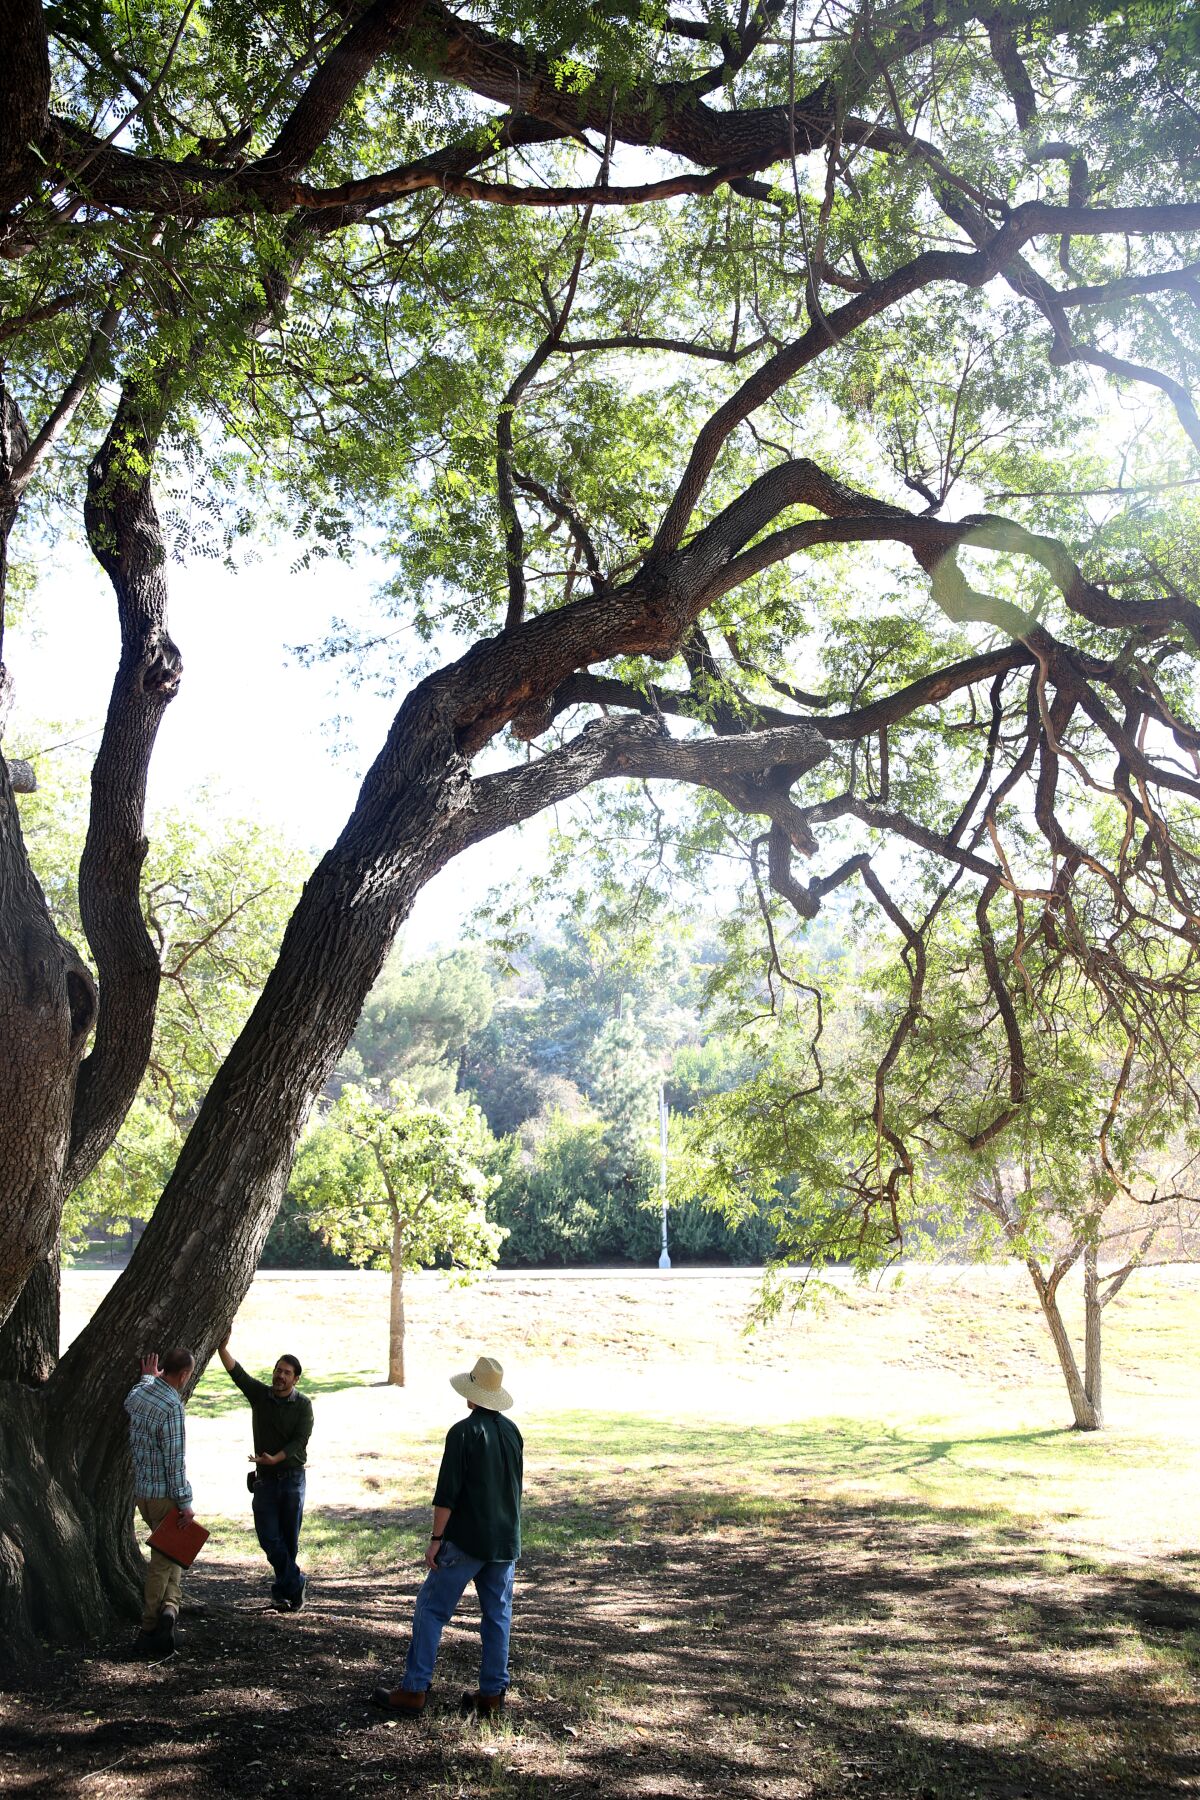 Leon Boroditsky, Jorge Orchoa, and Steve Dunlap, left to right, stand under a tipu tree, which is native to South America's tropical forests. It's one of the oldest trees in the city that stands in L.A.'s first arboretum.